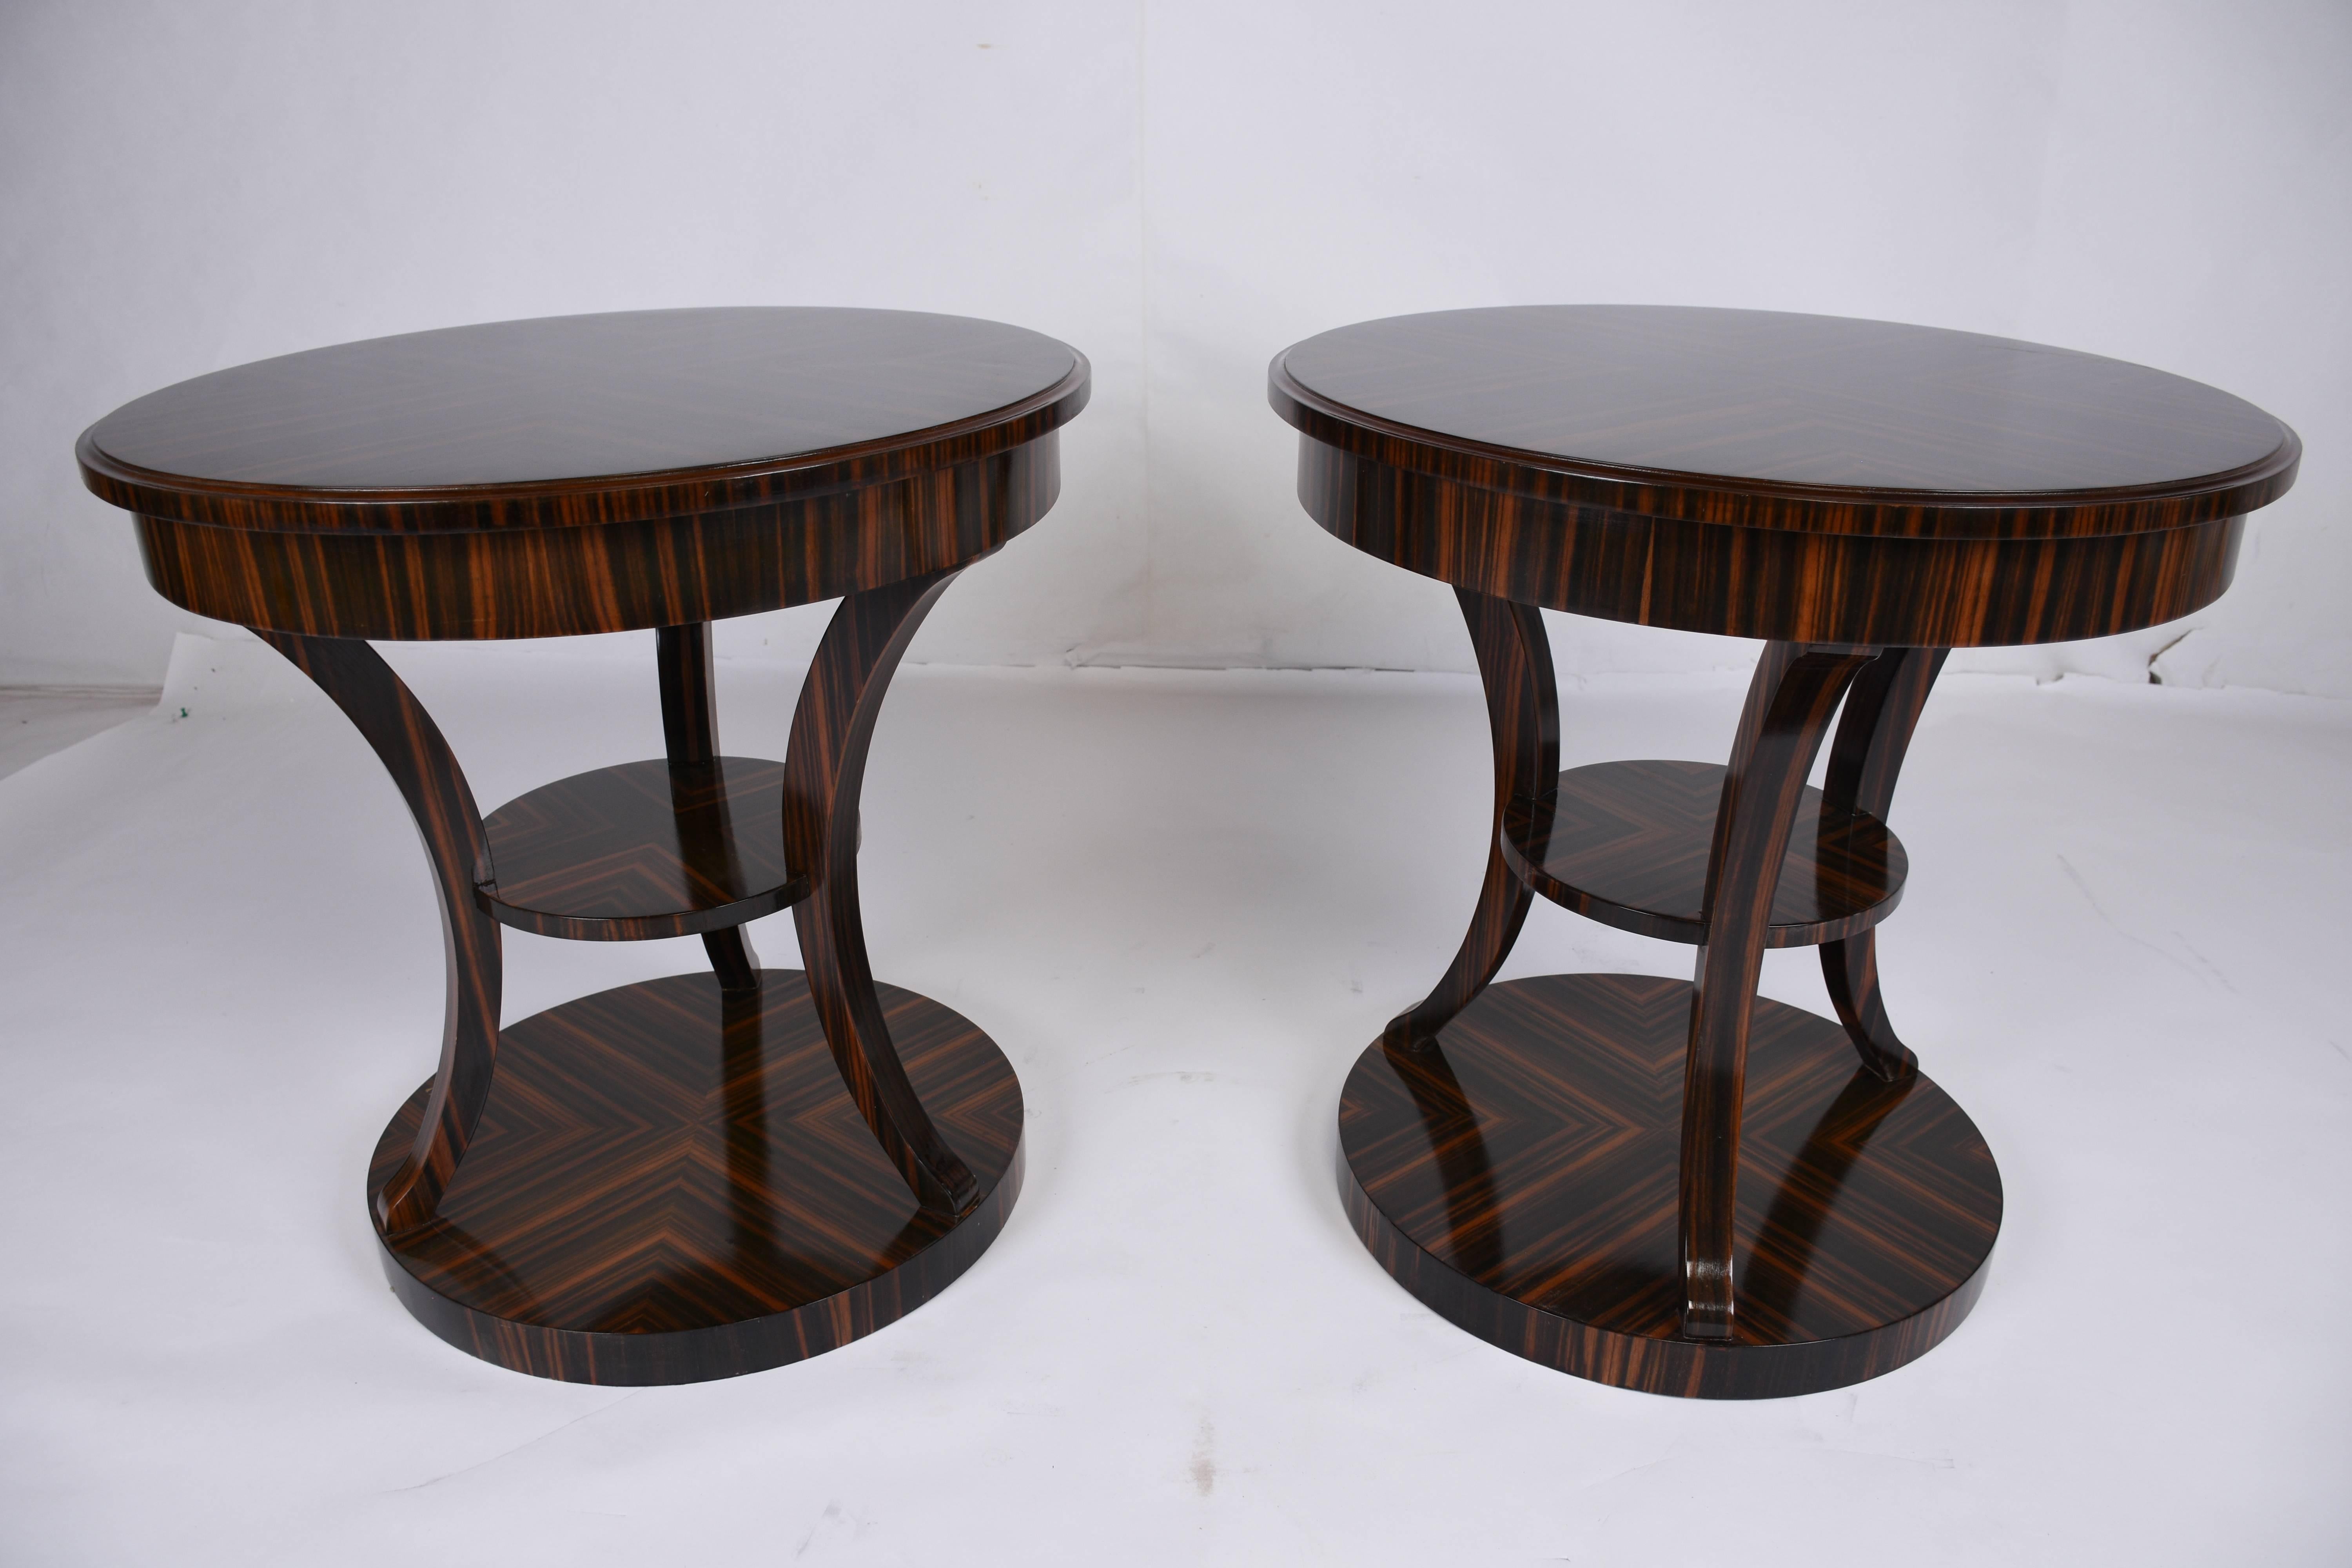 This 1970s vintage Mid-Century-style pair of side tables is beautifully adorned with exotic Brazilian wood veneers. The veneers feature a stunning wood grain and have been placed there the grains meet to form geometric designs. The tables are sturdy